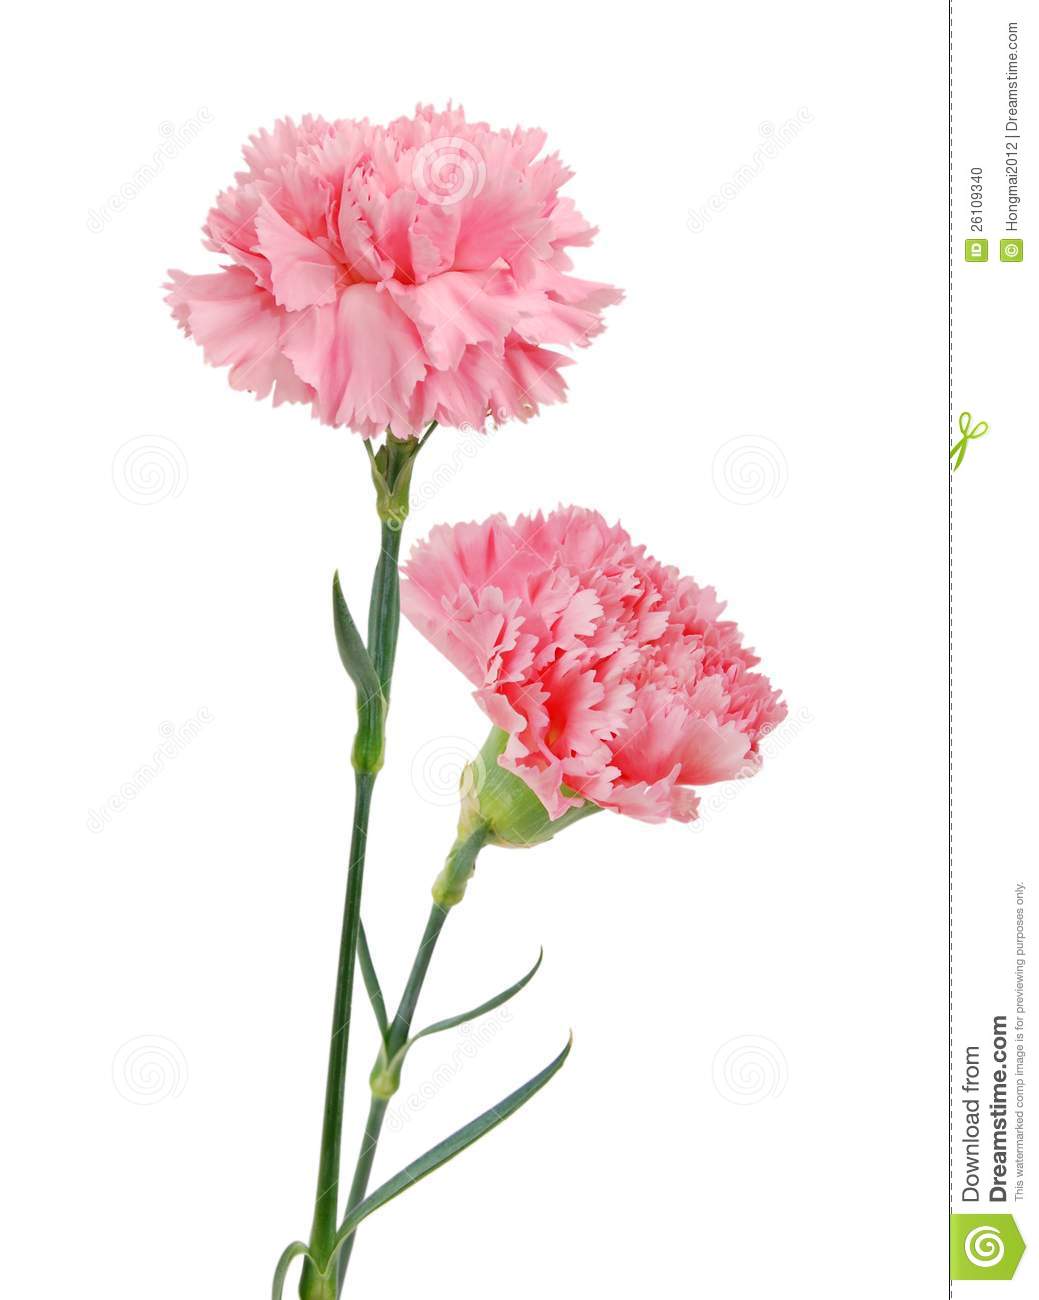 More Similar Stock Images Of   Decorative Pink Carnation Flowers